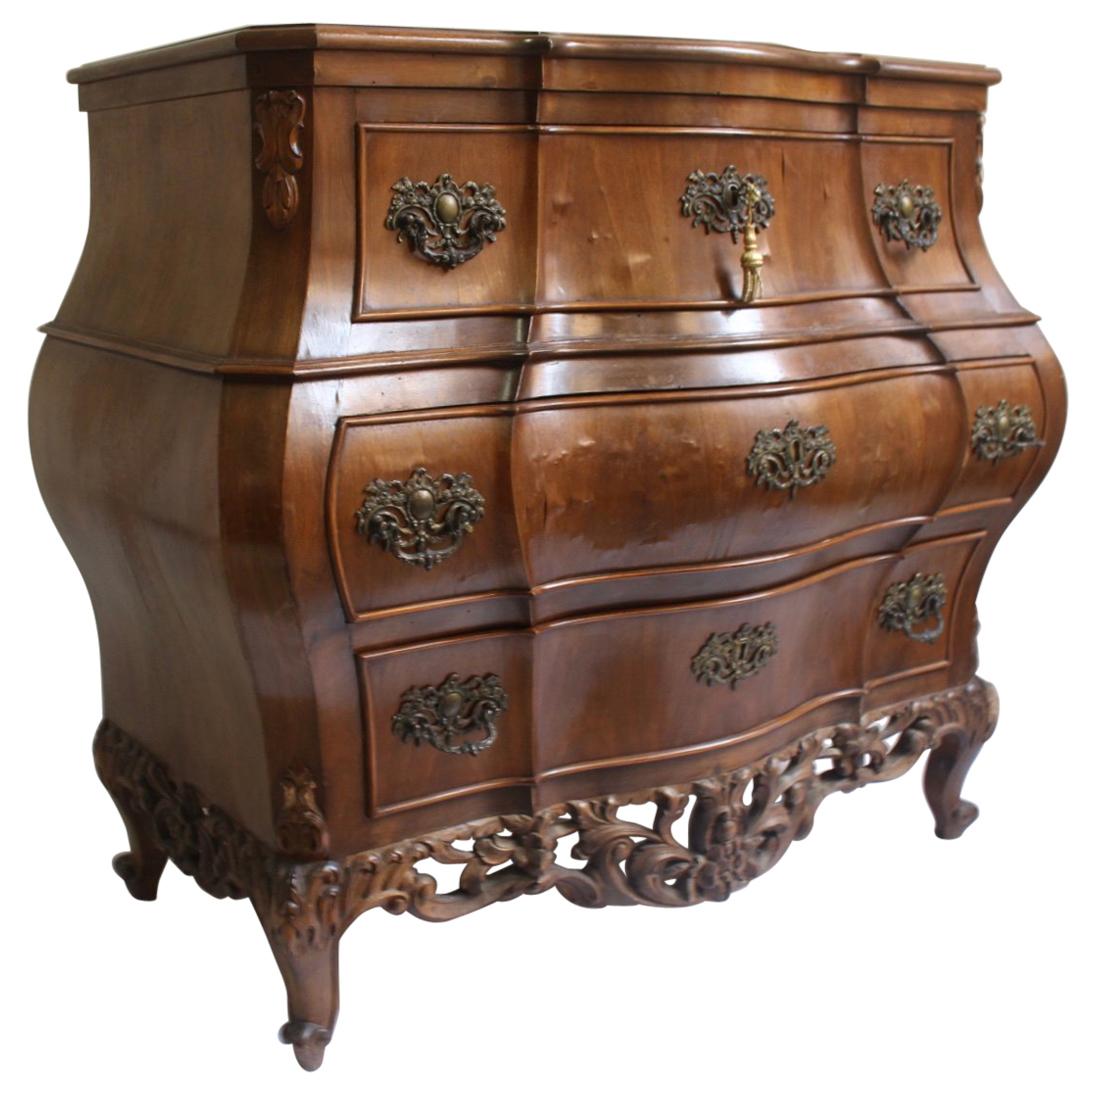 Bombé Louis XV Rococo Bombe Commode or Chest of Drawers by Mariano García, 1960s For Sale